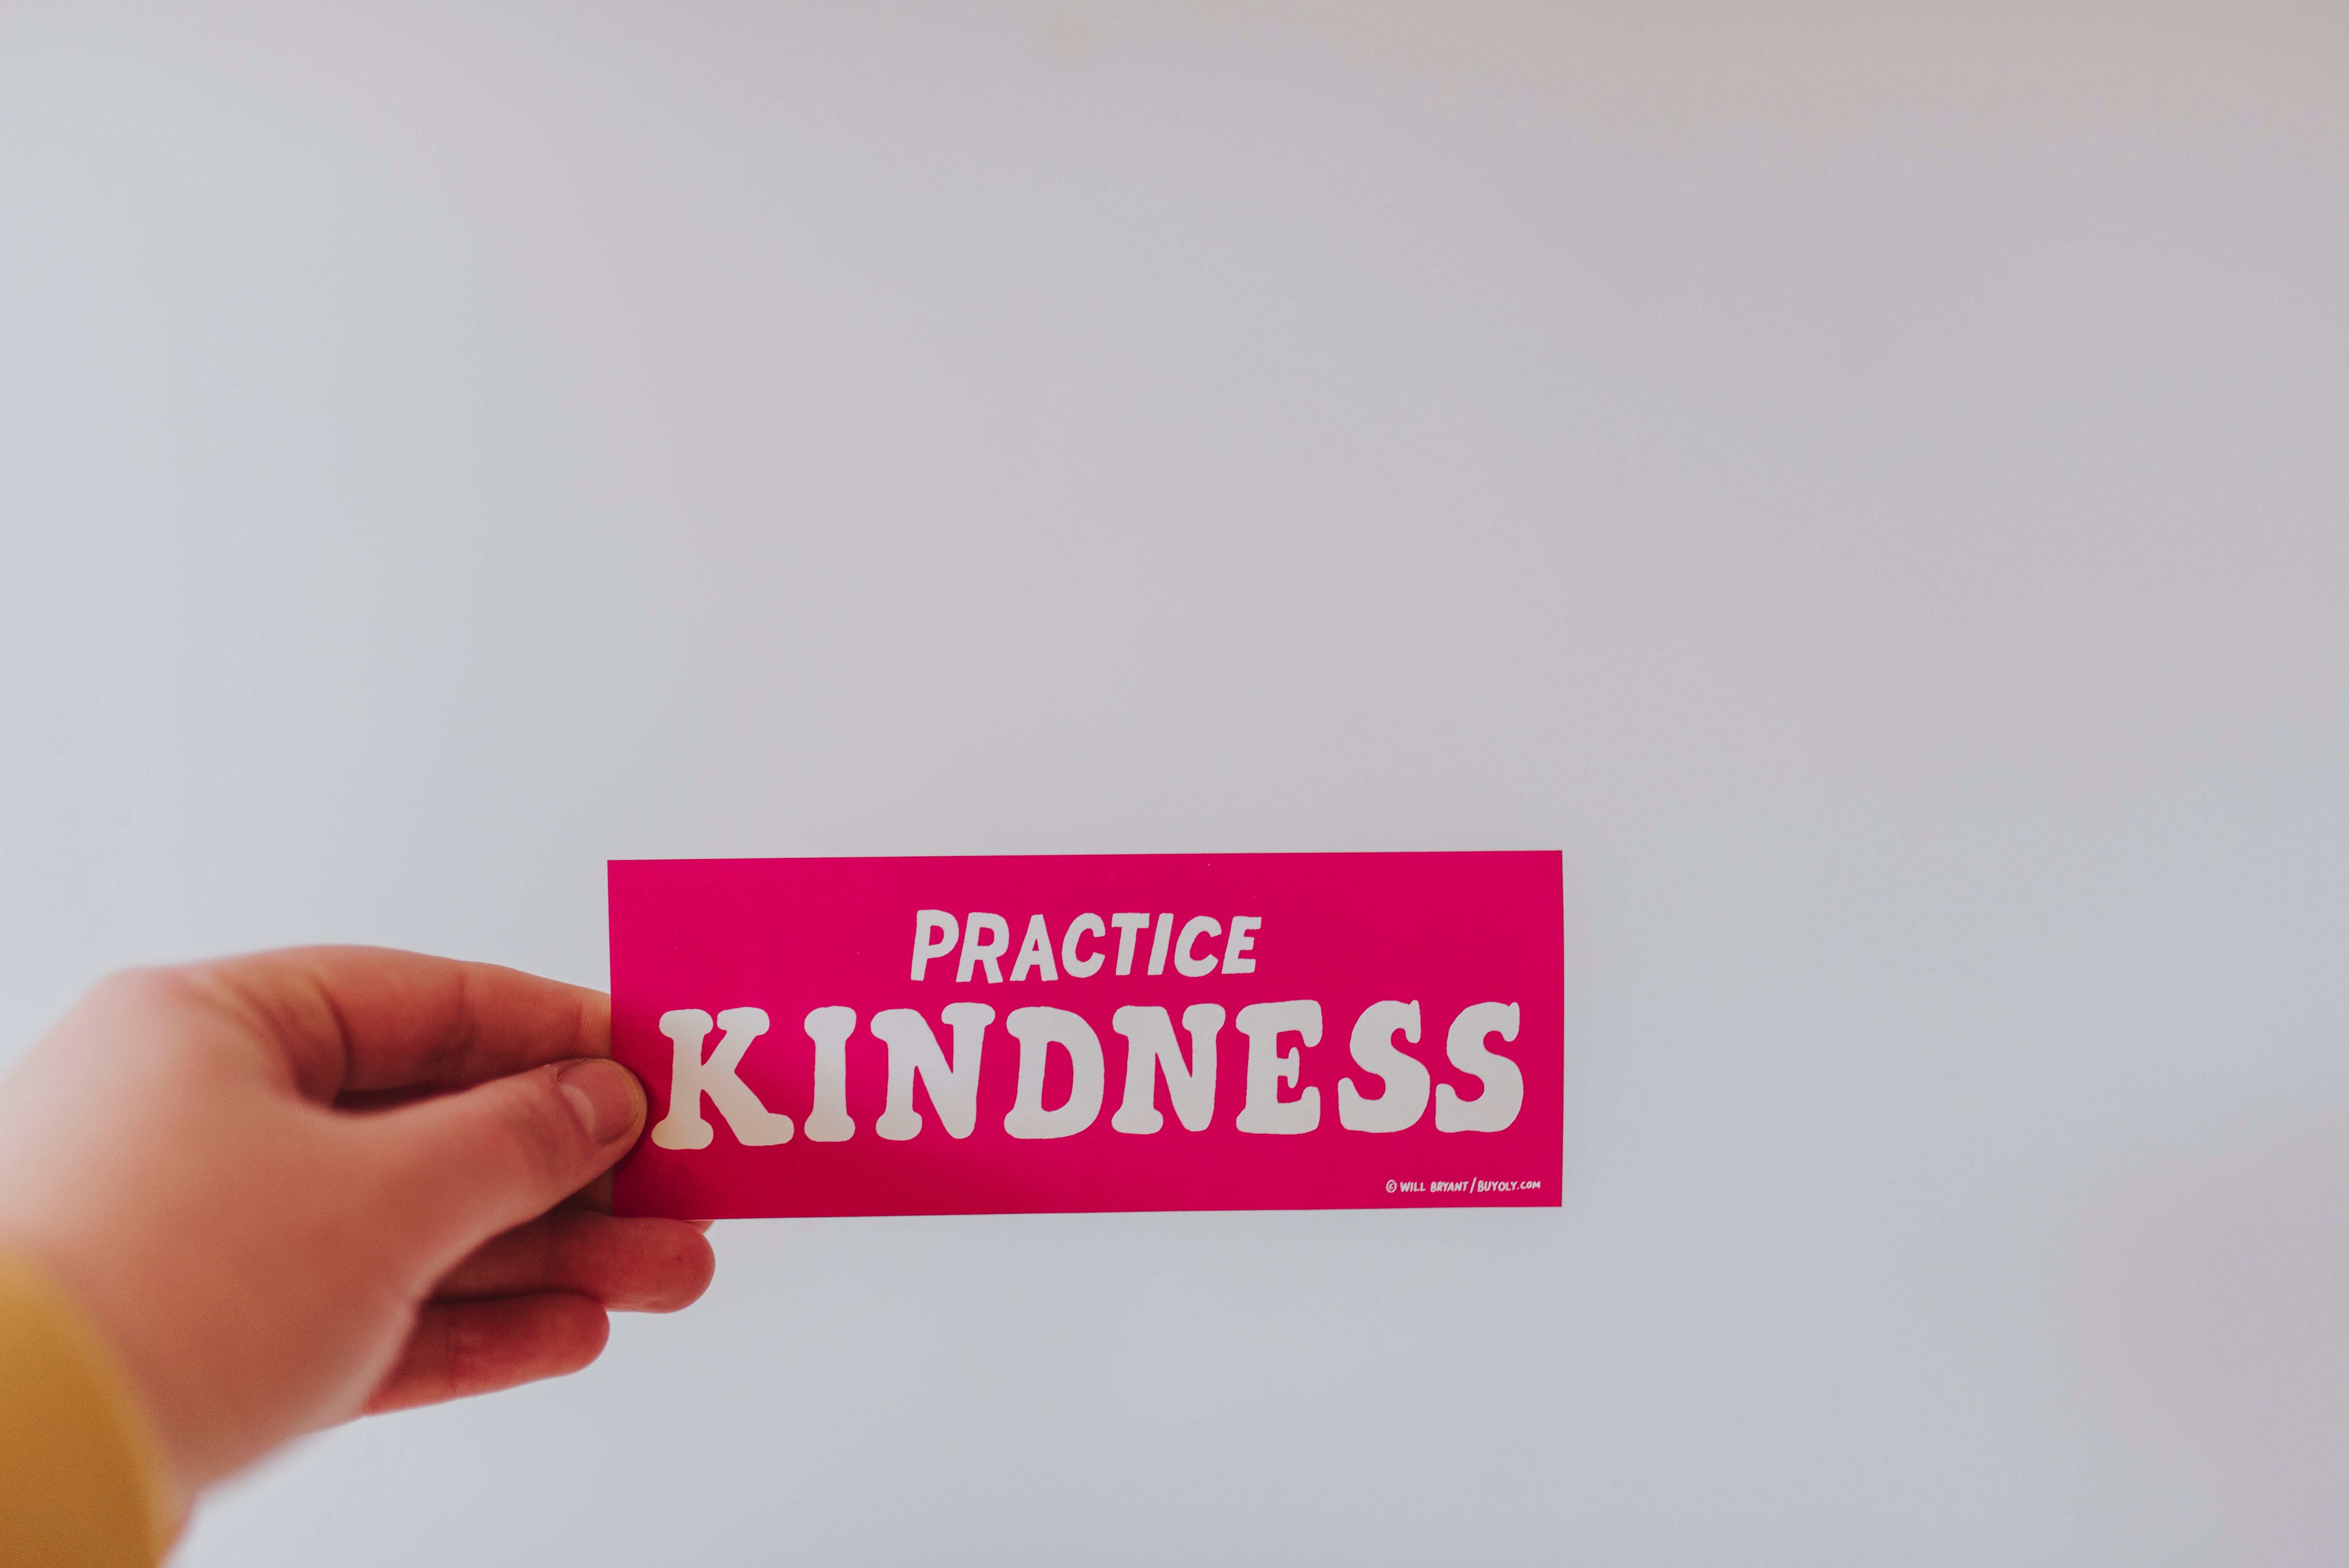 28 ways to practice kindness daily